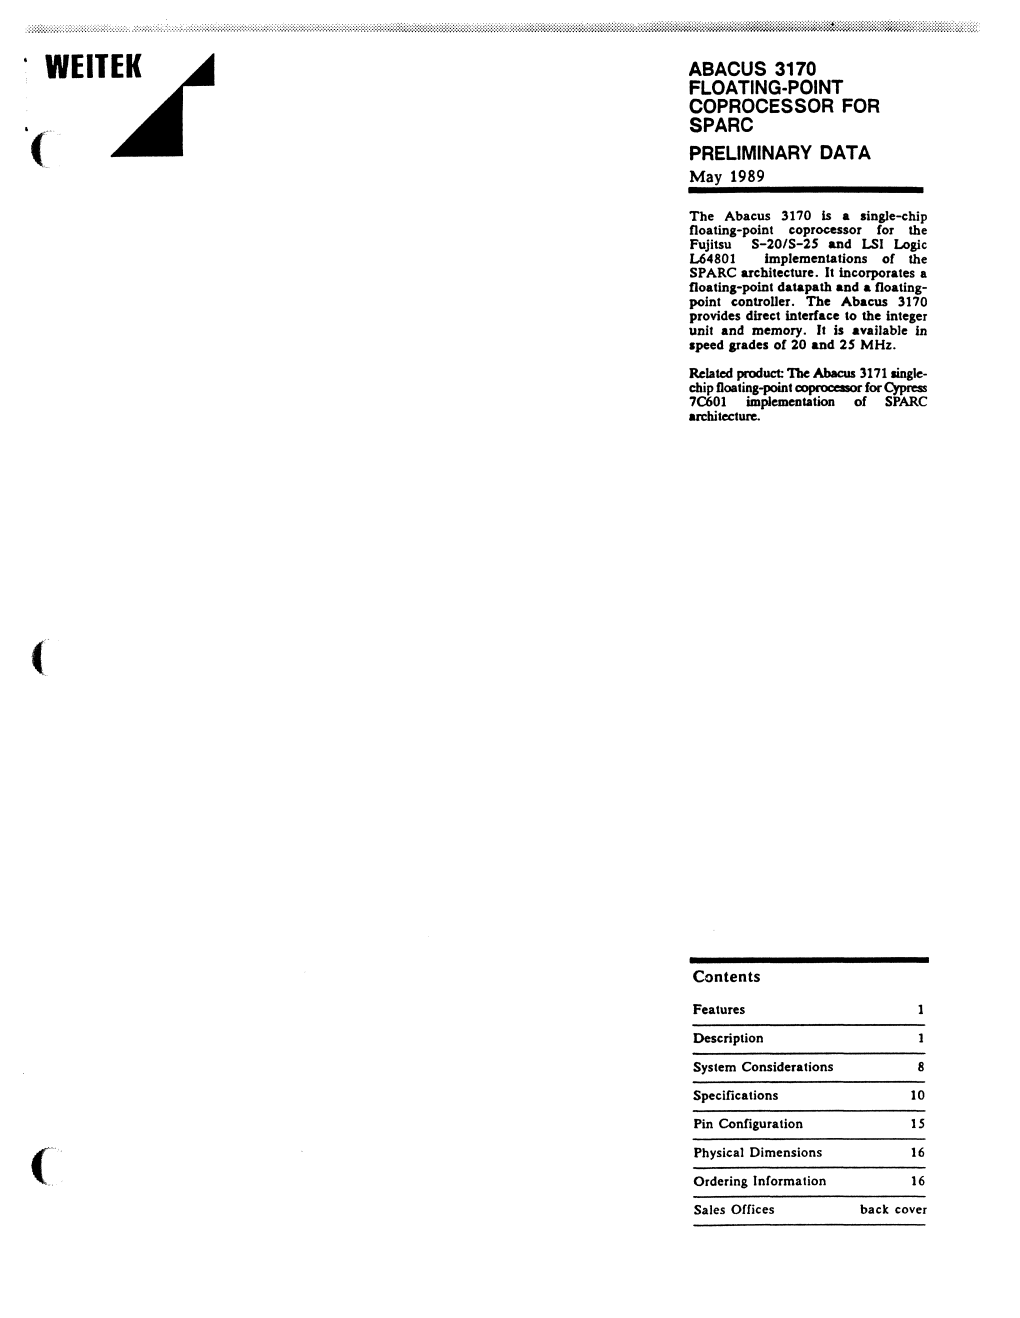 · Welter ABACUS 3170 FLOATING·POINT COPROCESSOR for SPARC PRELIMINARY DATA May 1989